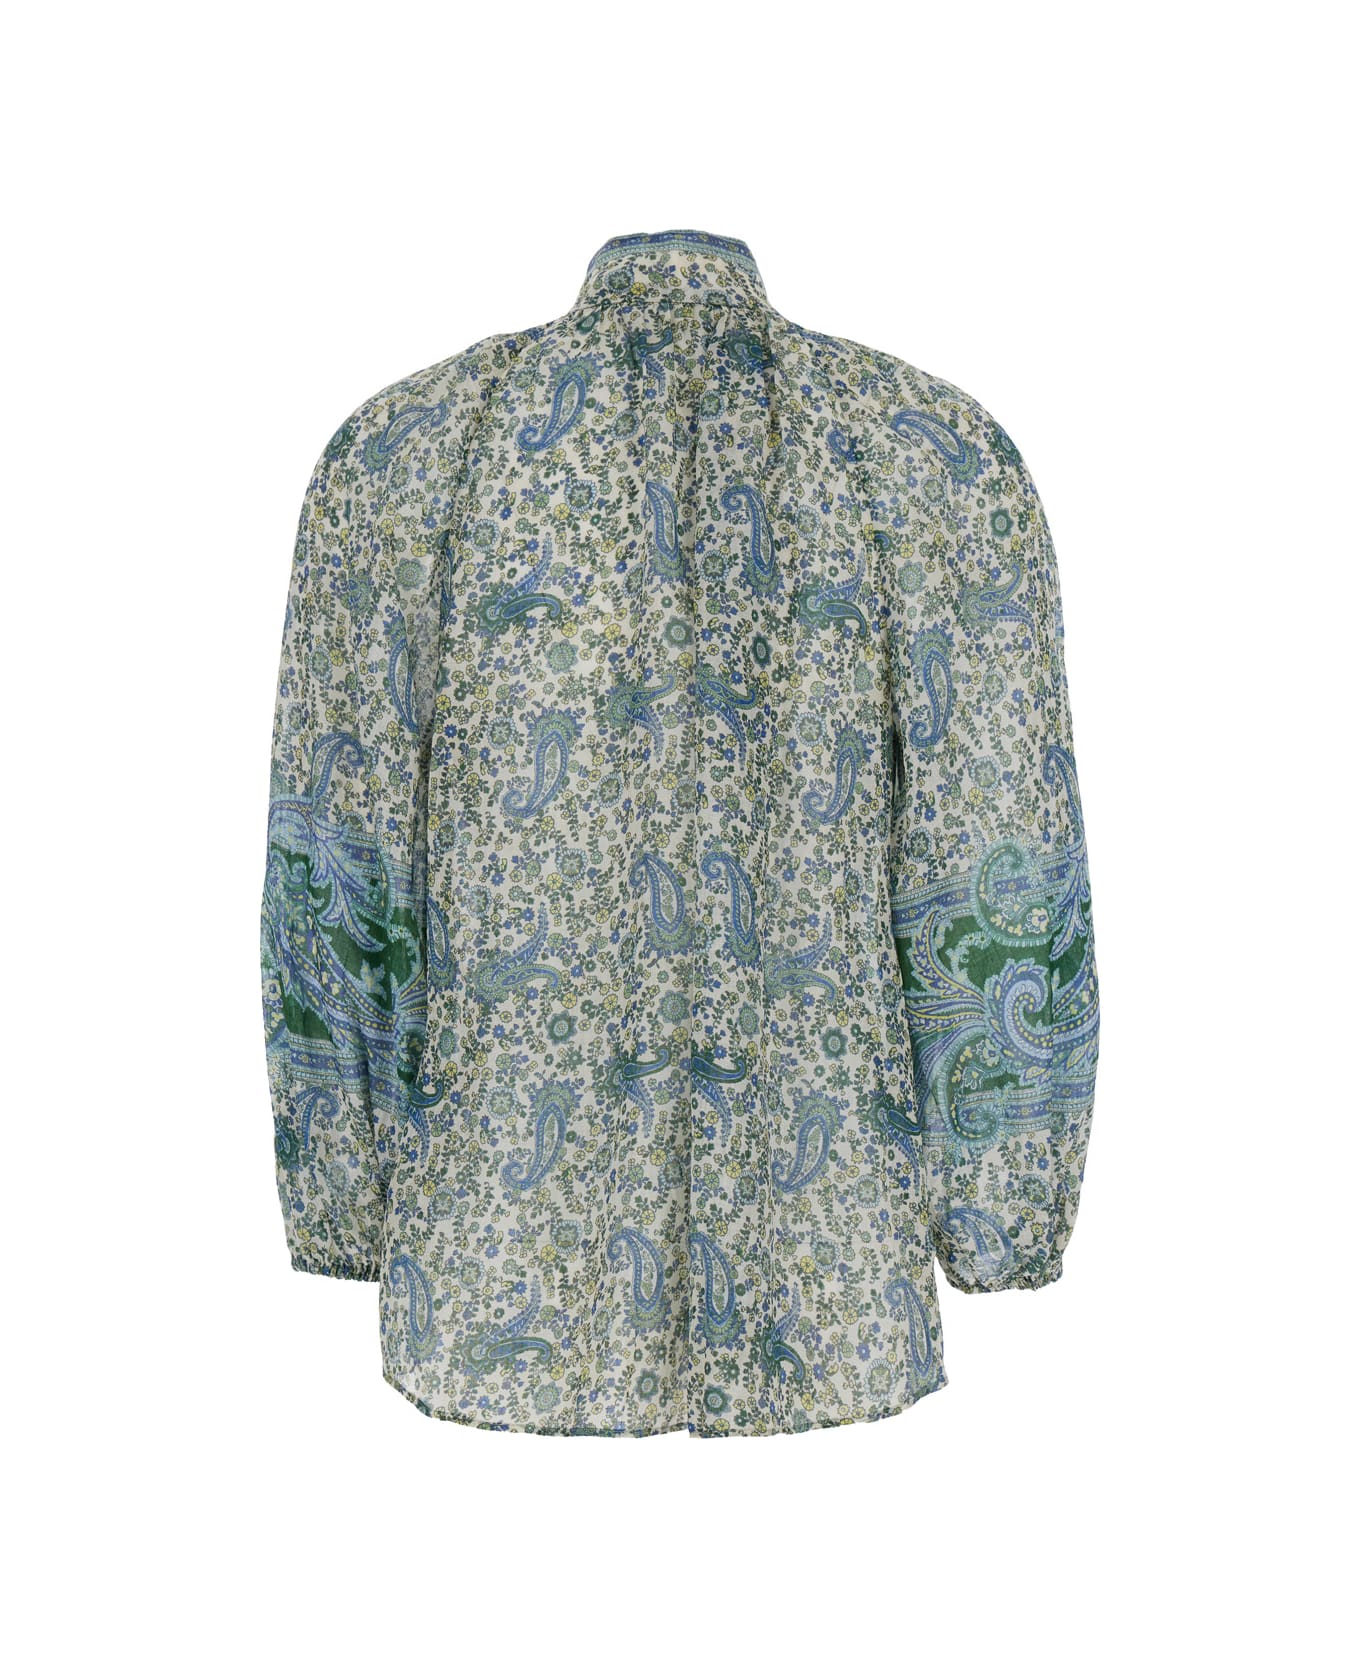 Zimmermann Multicolor Blouse With Embroidery And Puffed Sleeves In Eco Silk Woman - Multicolor